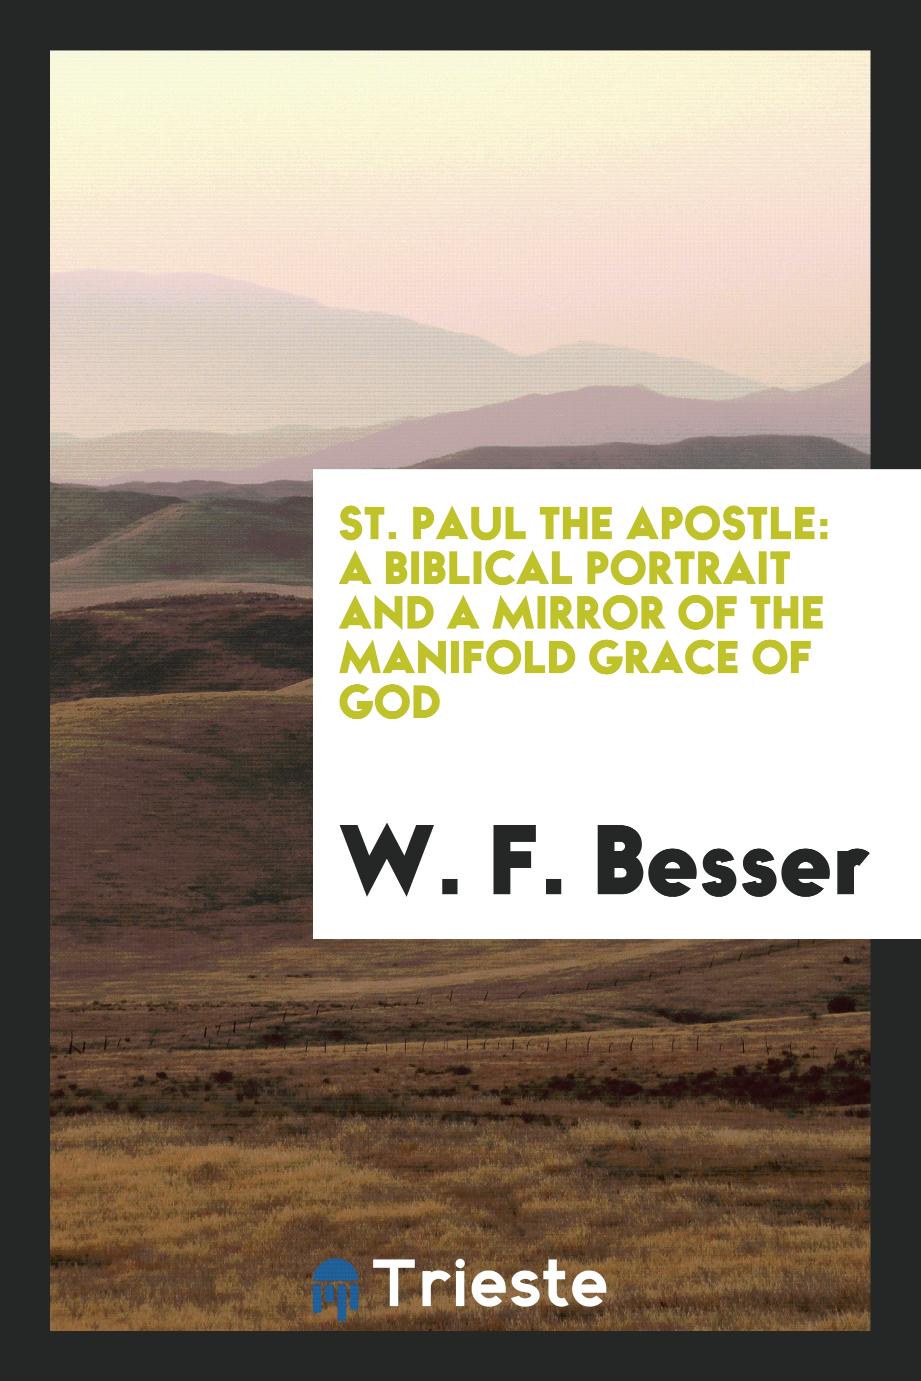 St. Paul the apostle: a Biblical portrait and a mirror of the manifold grace of God